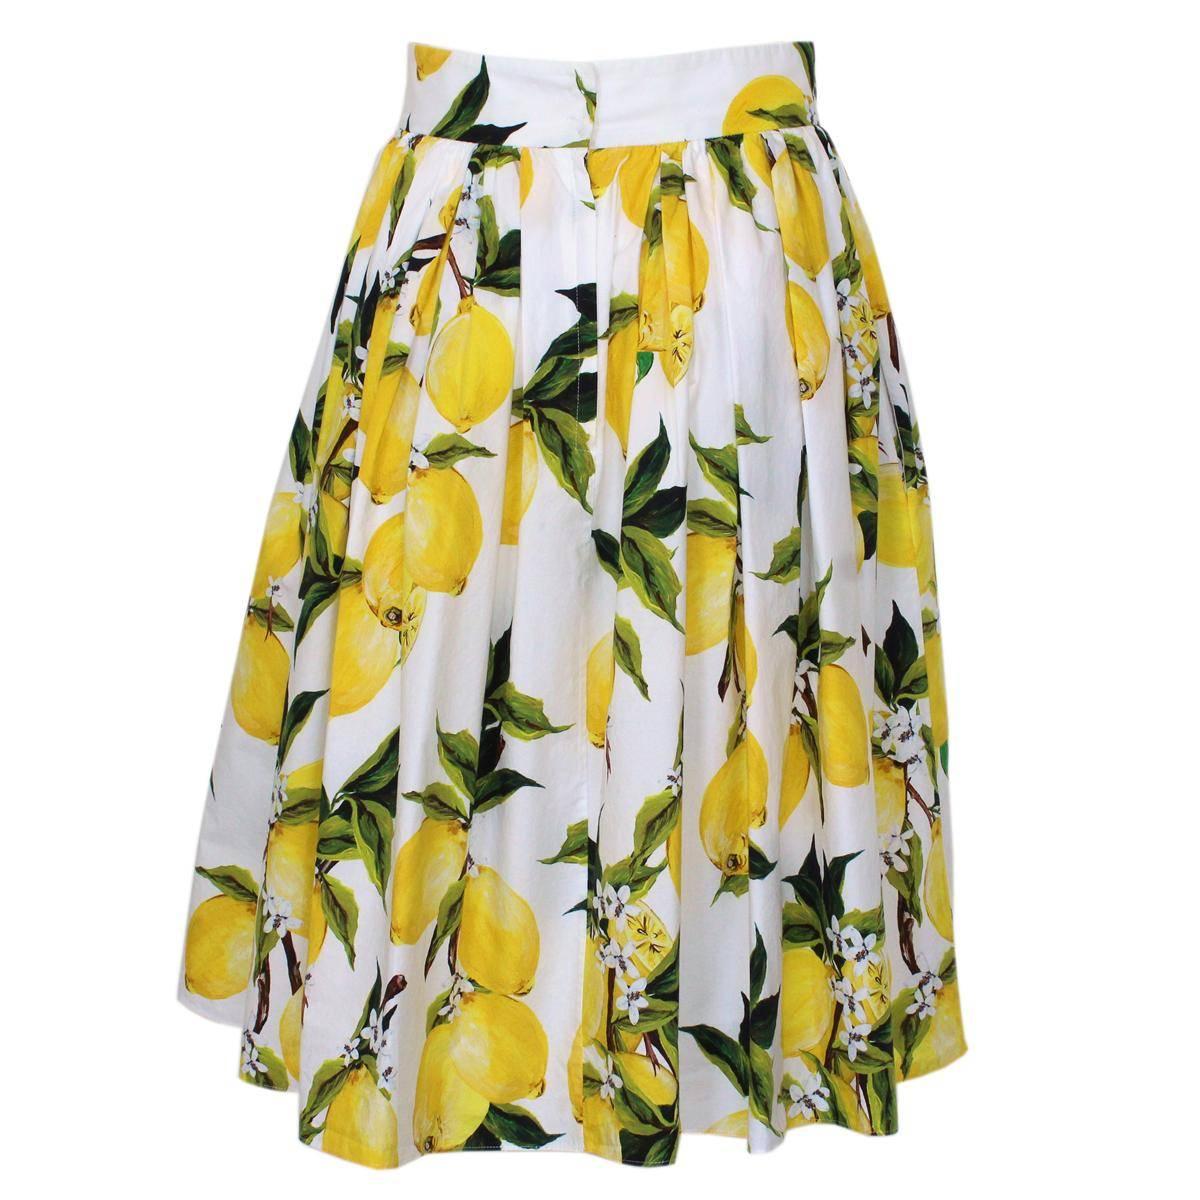 Fantastic and iconic Dolce & Gabbana skirt
2016 Spring Summer collection
Fruit theme
Lemon print
Cotton 
Total length cm 62 (24.4 inches)
Made in Italy
Worldwide express shipping included in the price !